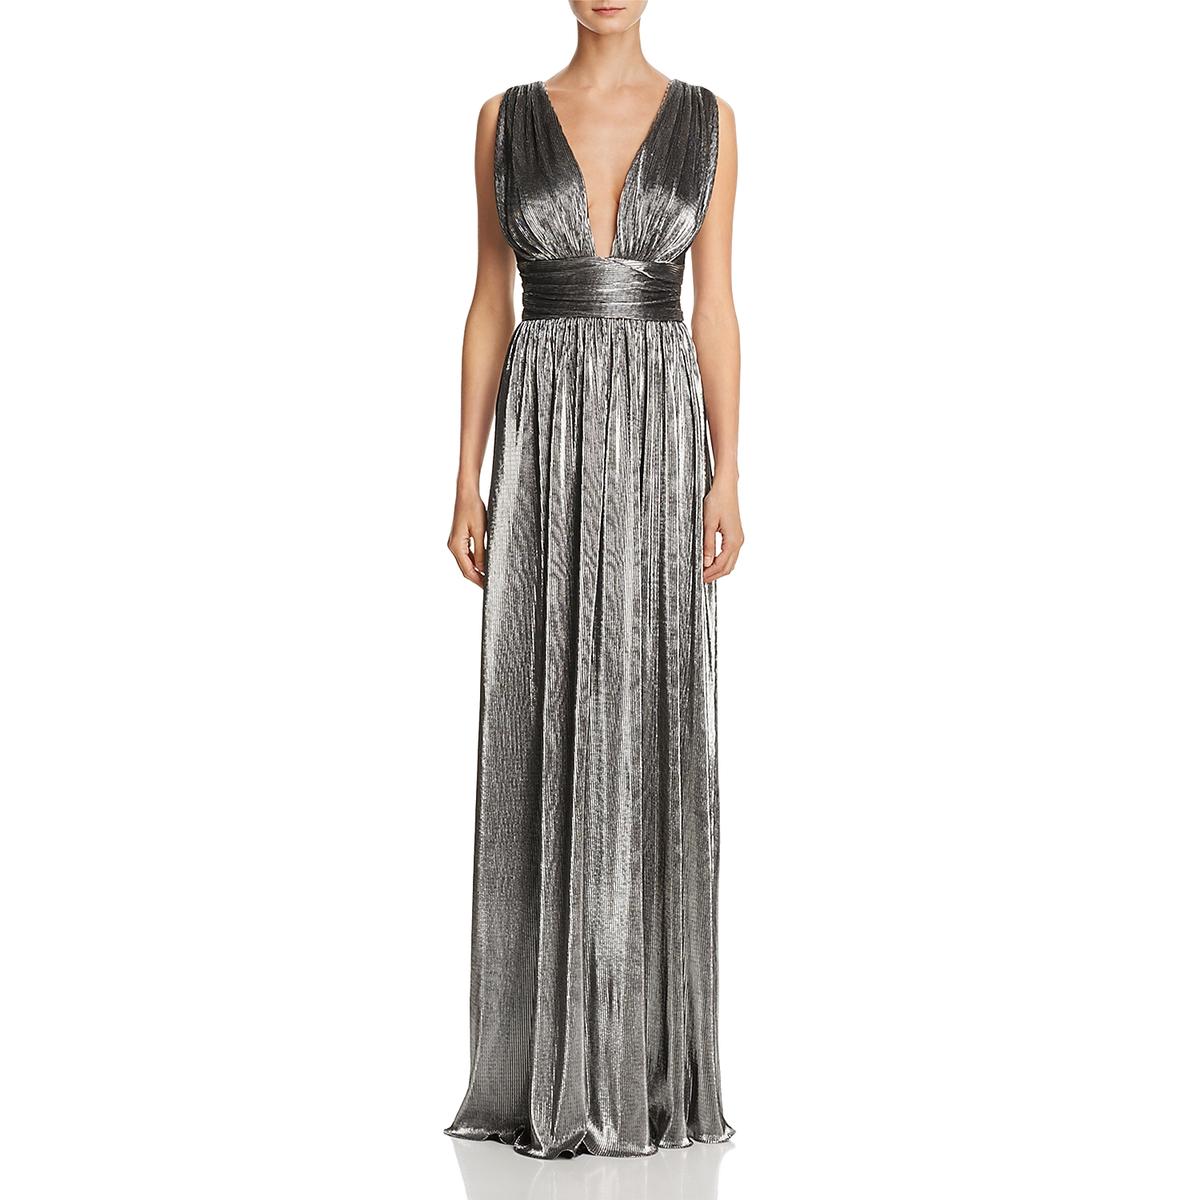 Laundry by Shelli Segal Womens Silver Metallic Evening Dress Gown 2 ...